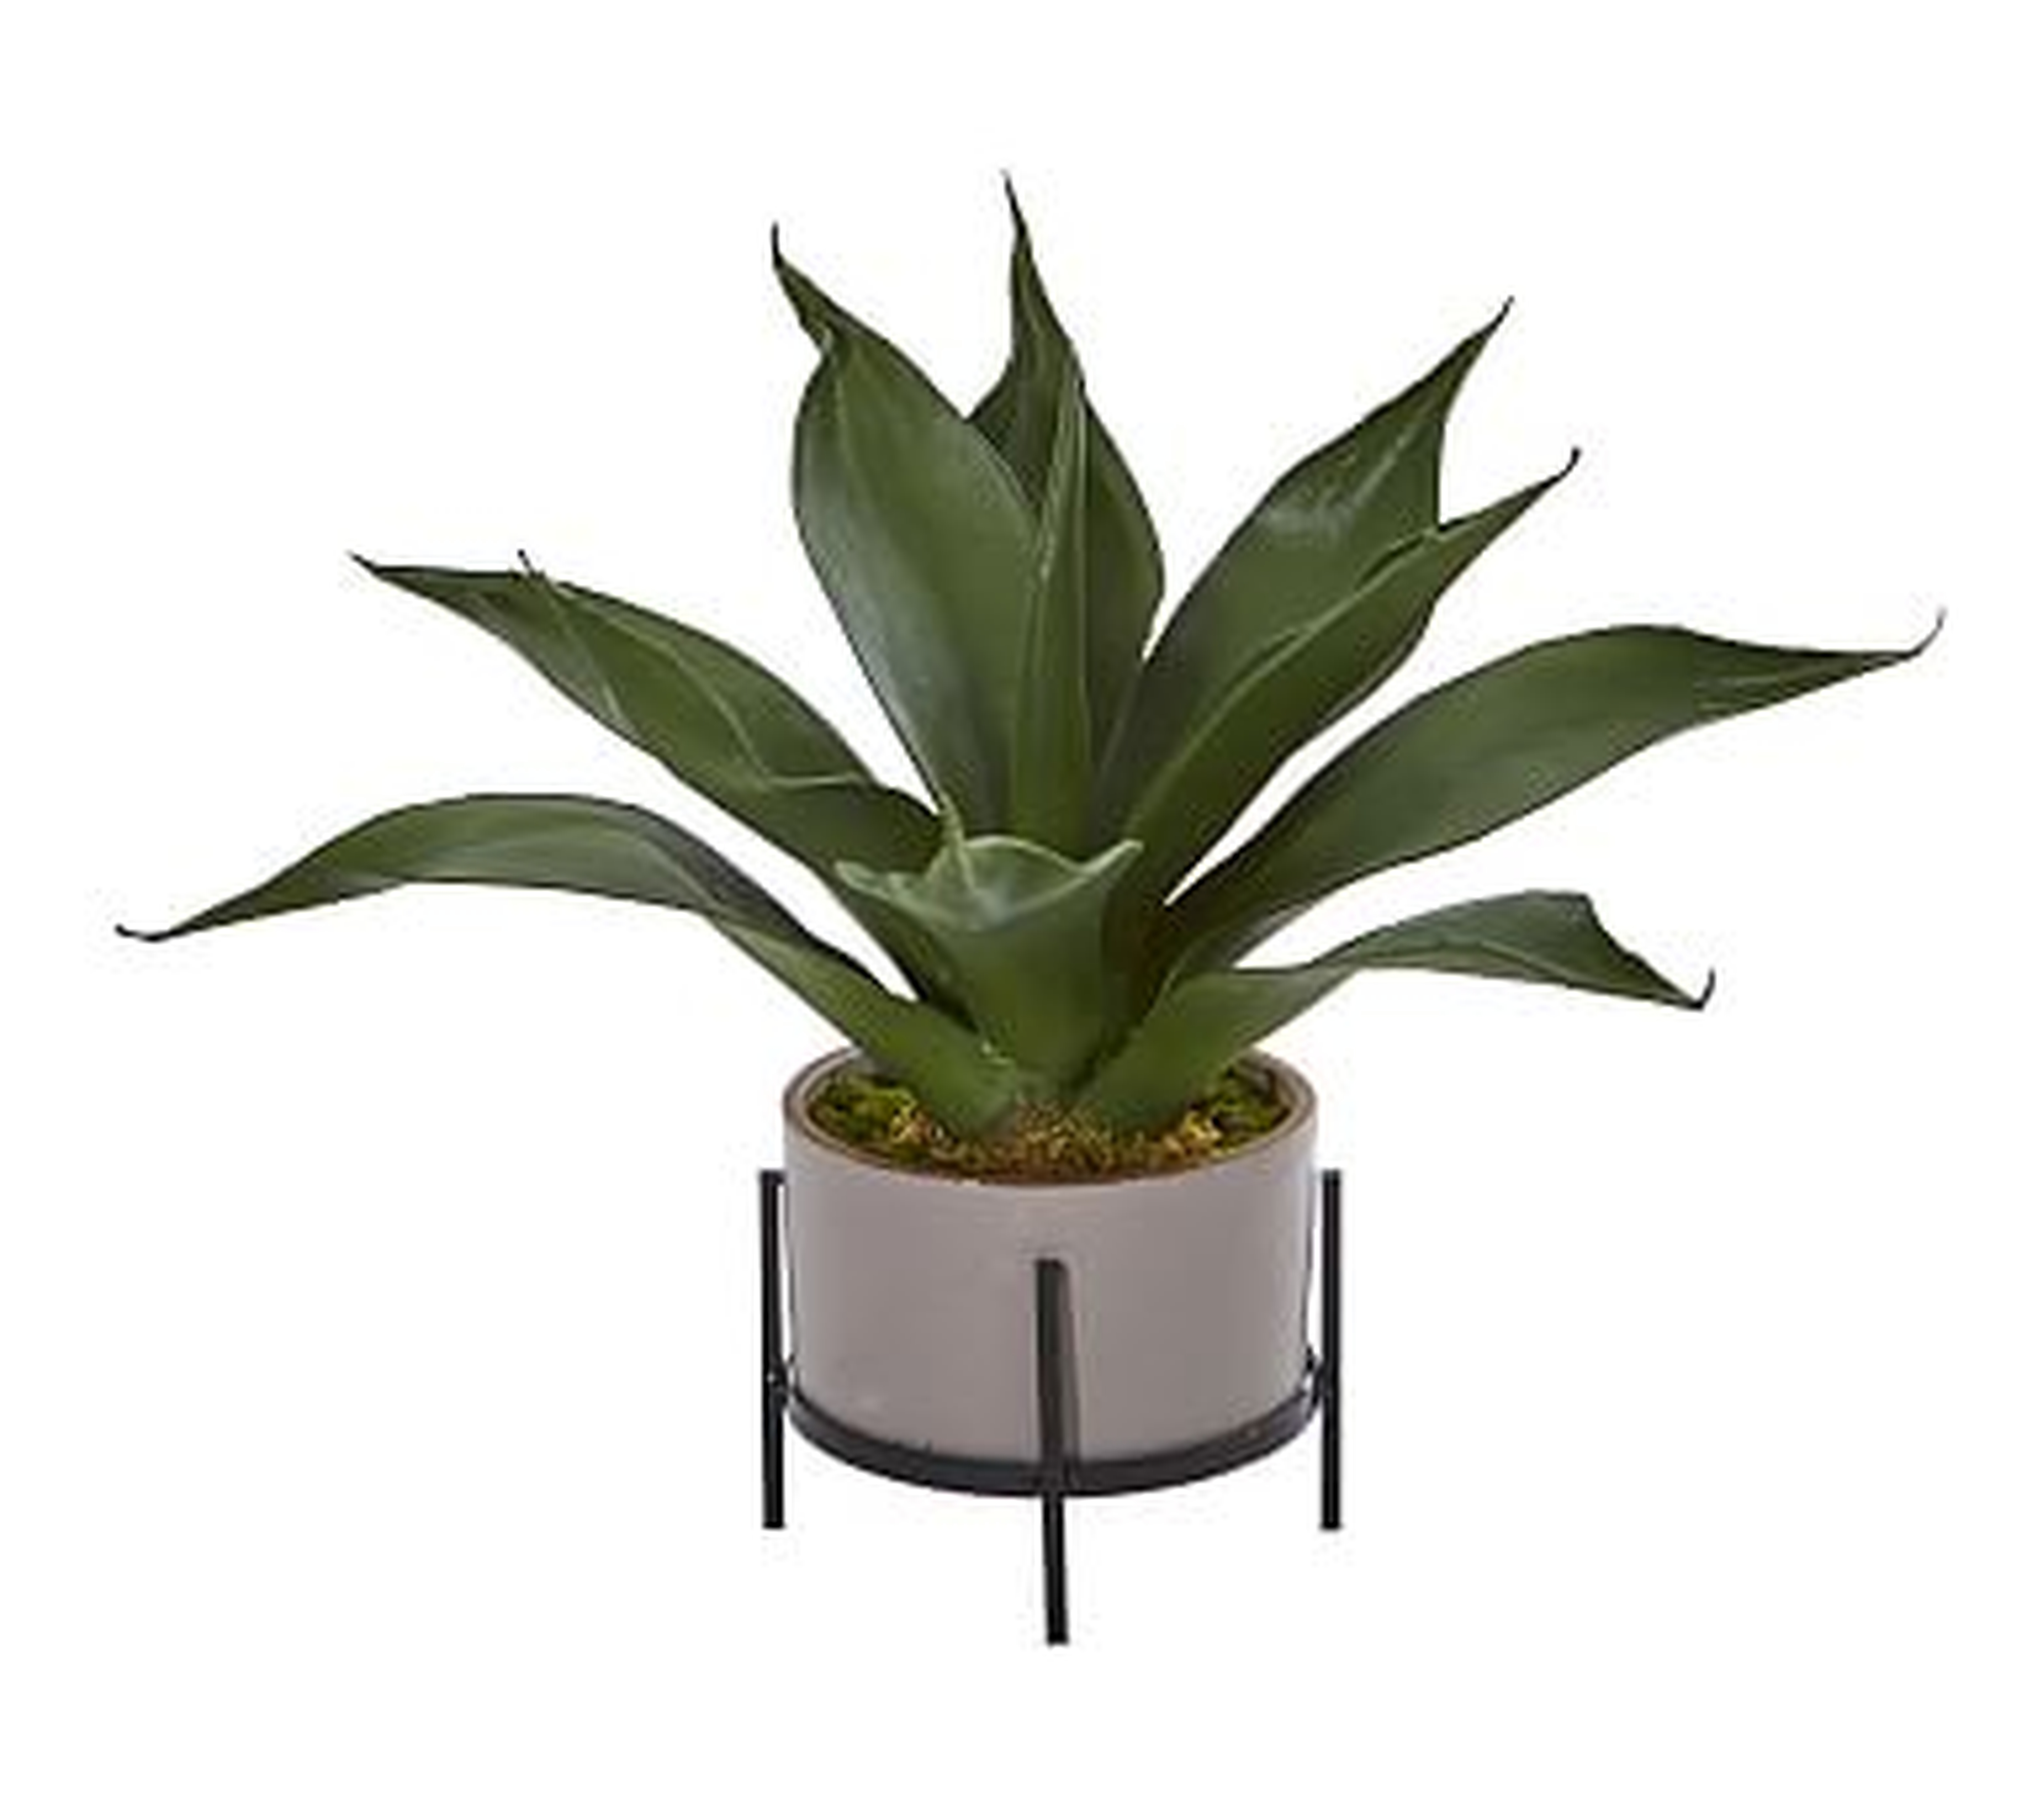 Faux Agave Succulent In Decorative Planter - Pottery Barn